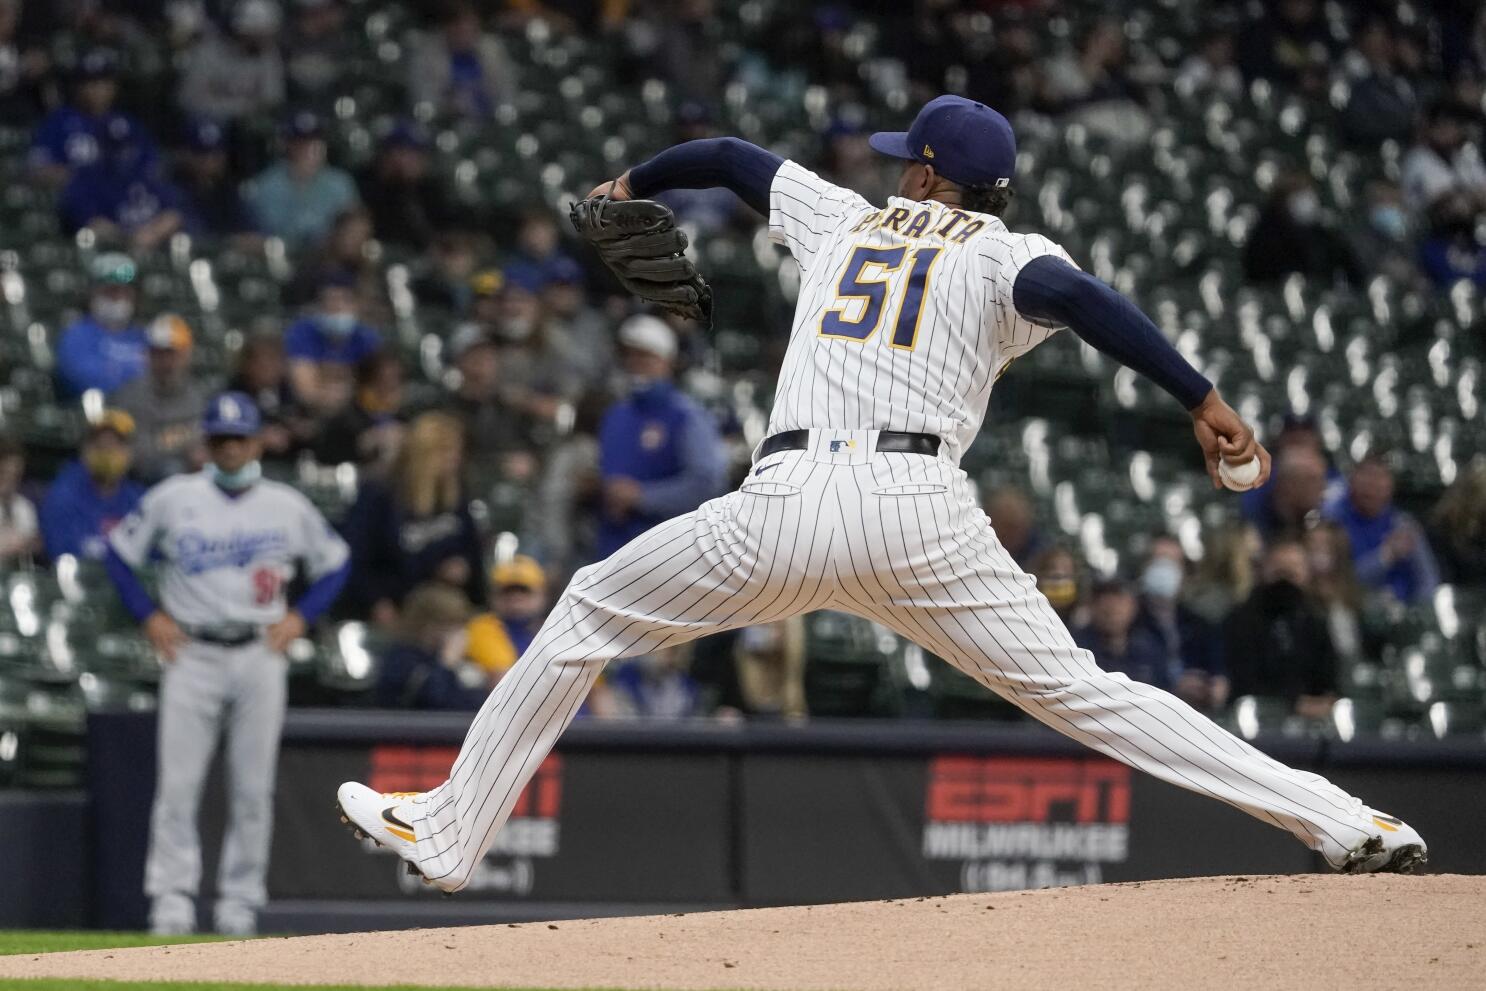 How the Brewers' strong starting rotation allowed Craig Counsell